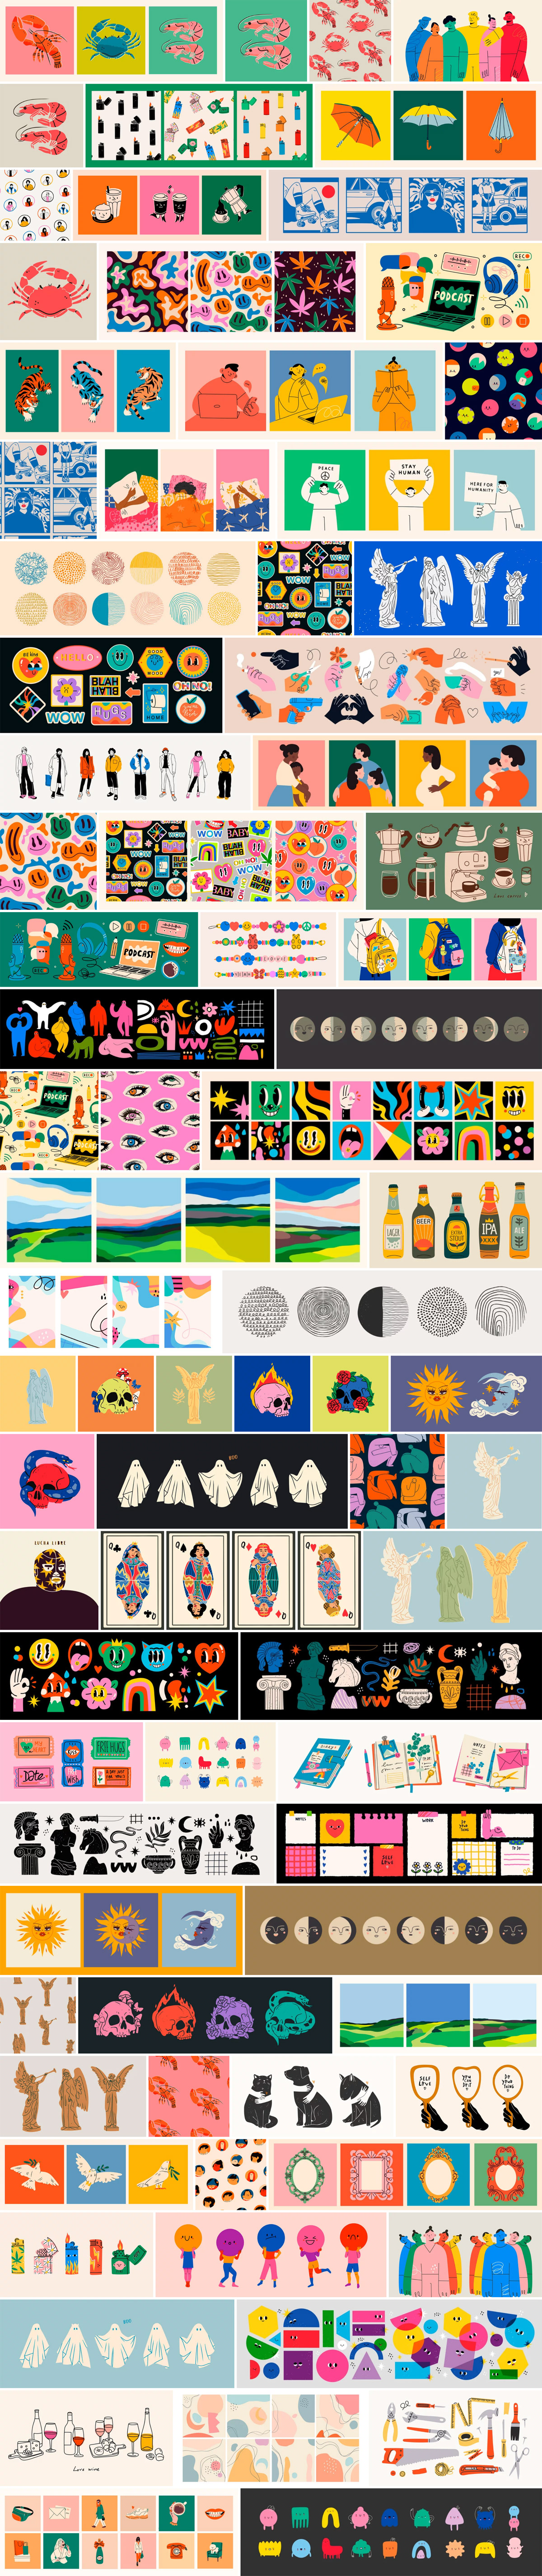 Download fun, playful vector graphics and illustrations in striking colors